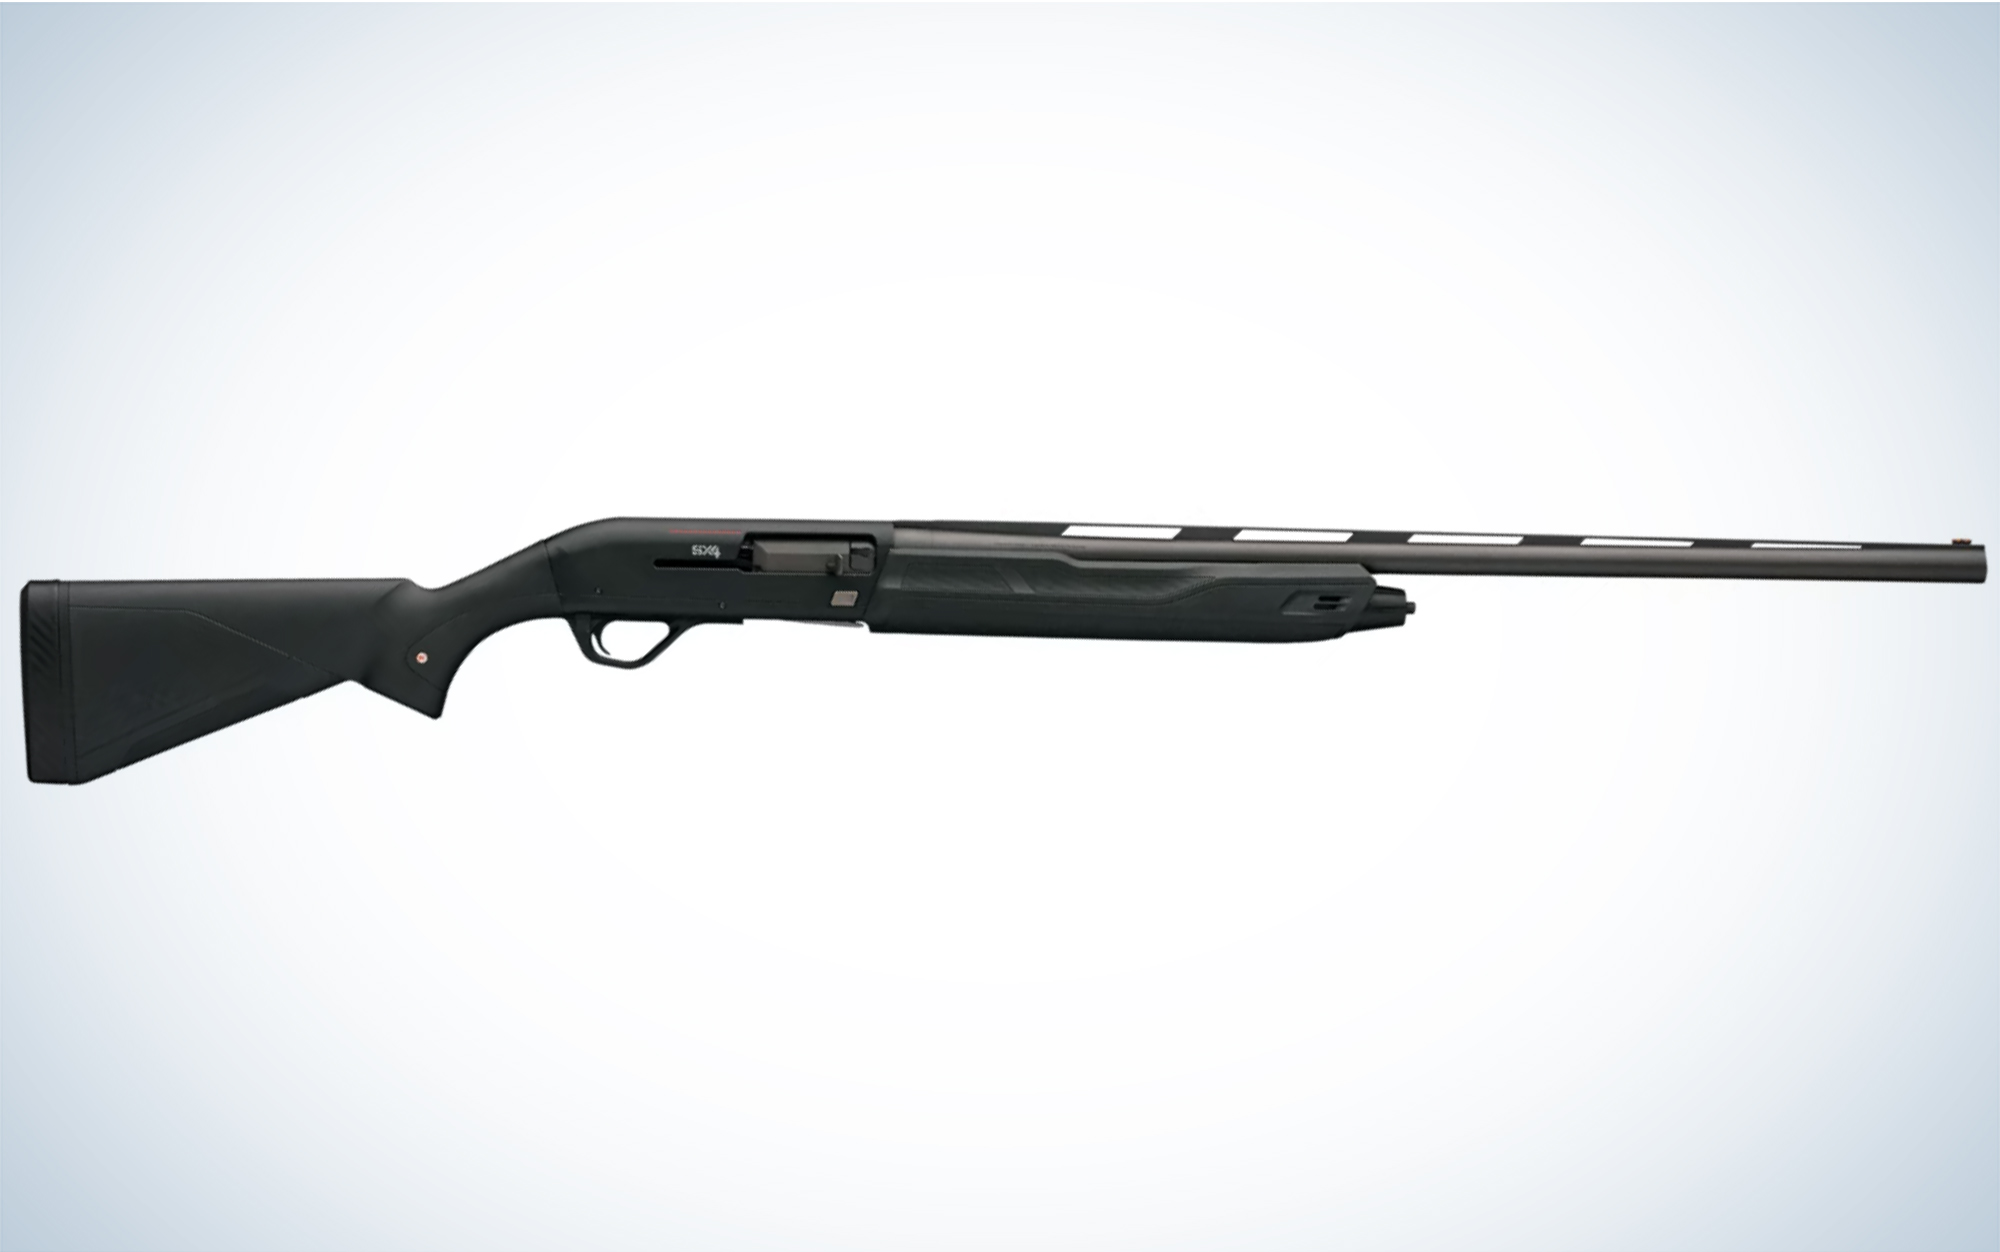 The Winchester SX4 is one of the best shotguns for rabbit hunting.